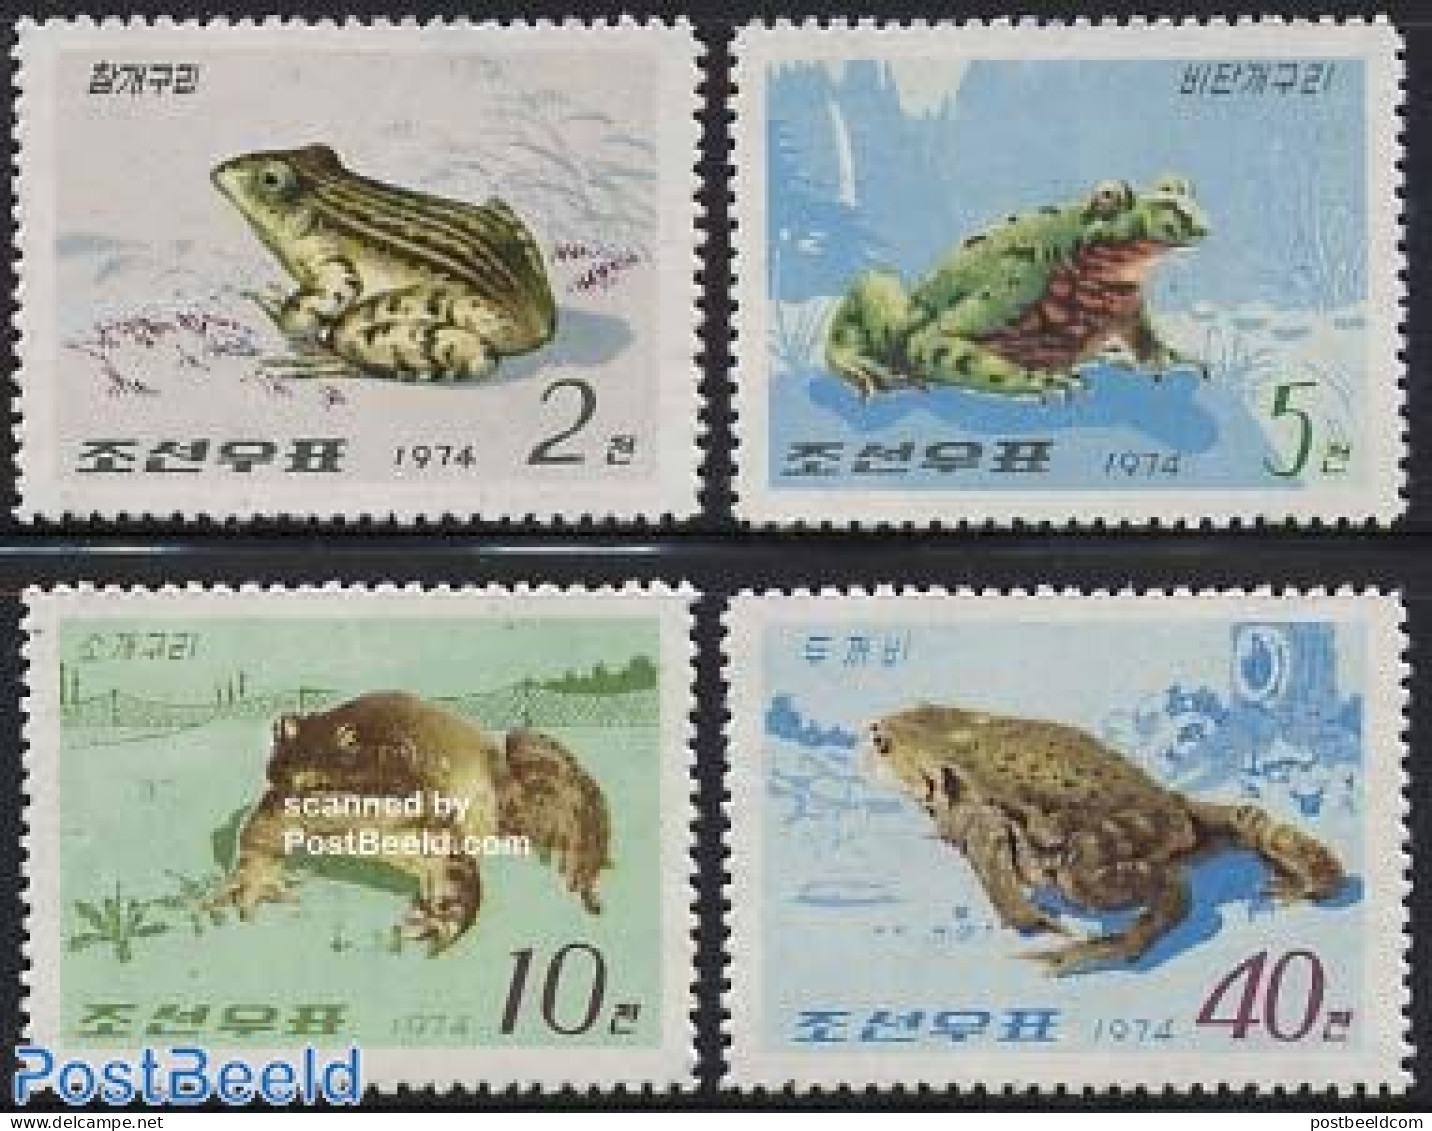 Korea, North 1974 Frogs 4v, Mint NH, Nature - Frogs & Toads - Reptiles - Korea (Nord-)